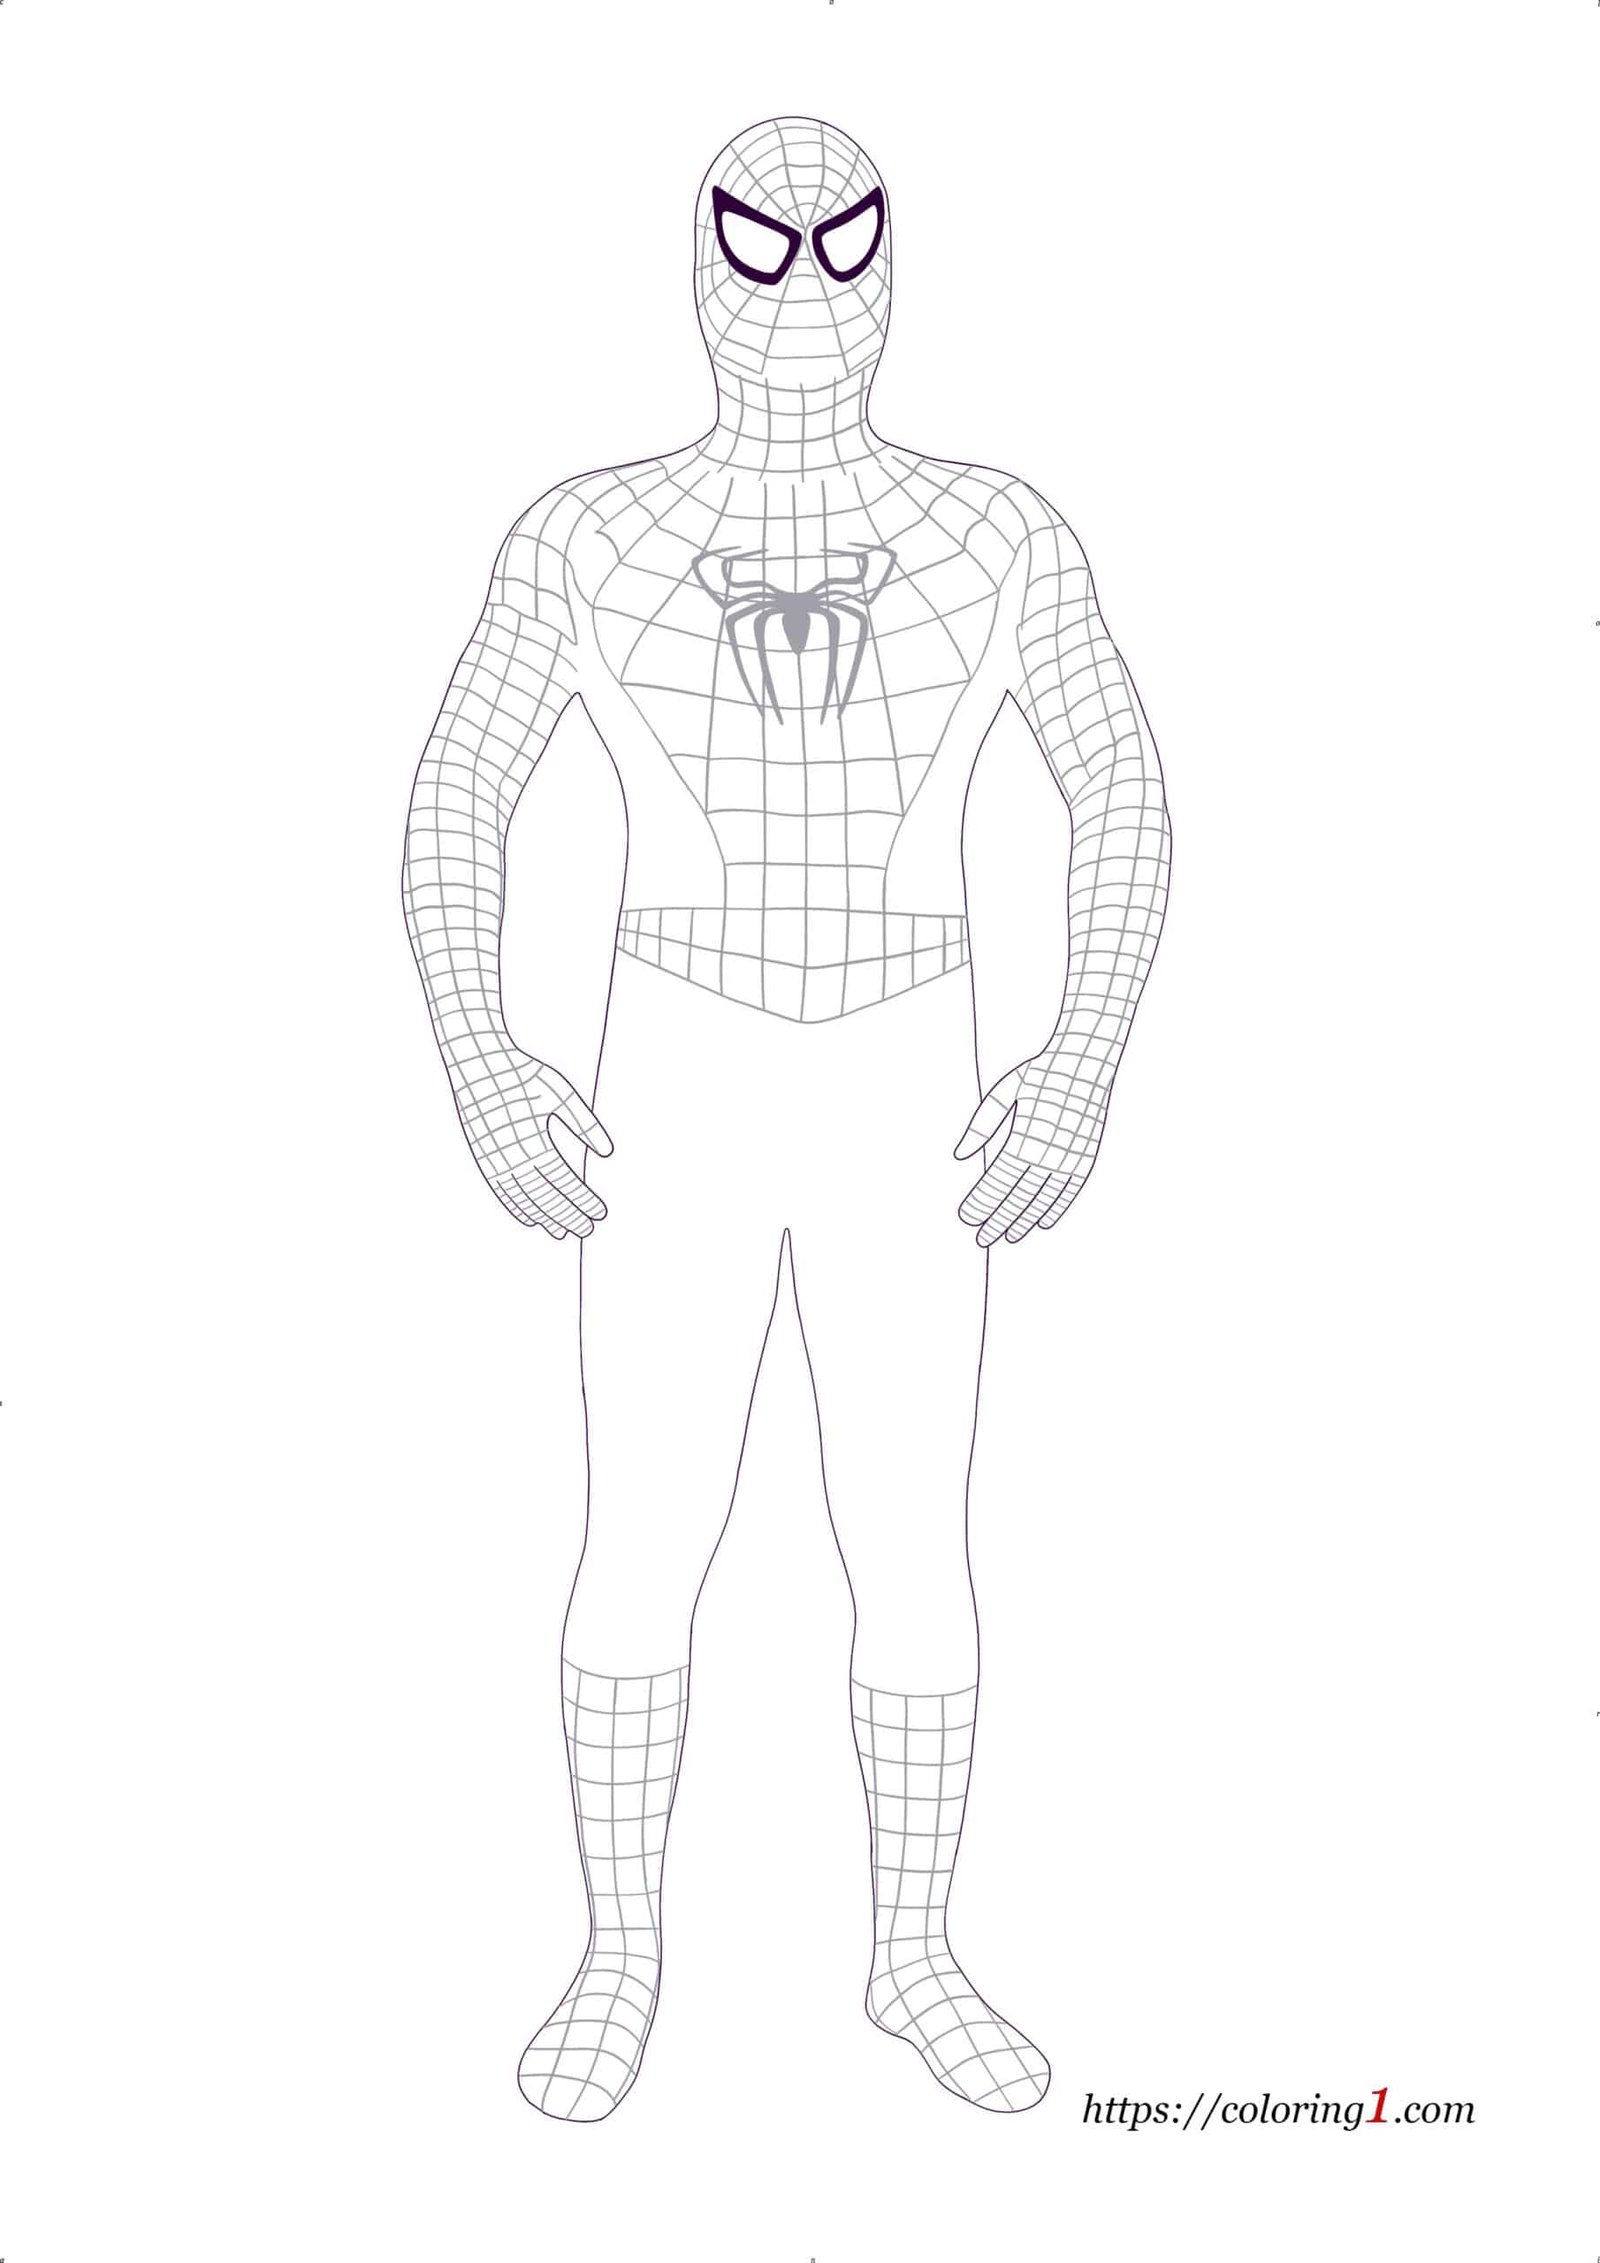 Black spiderman coloring pages